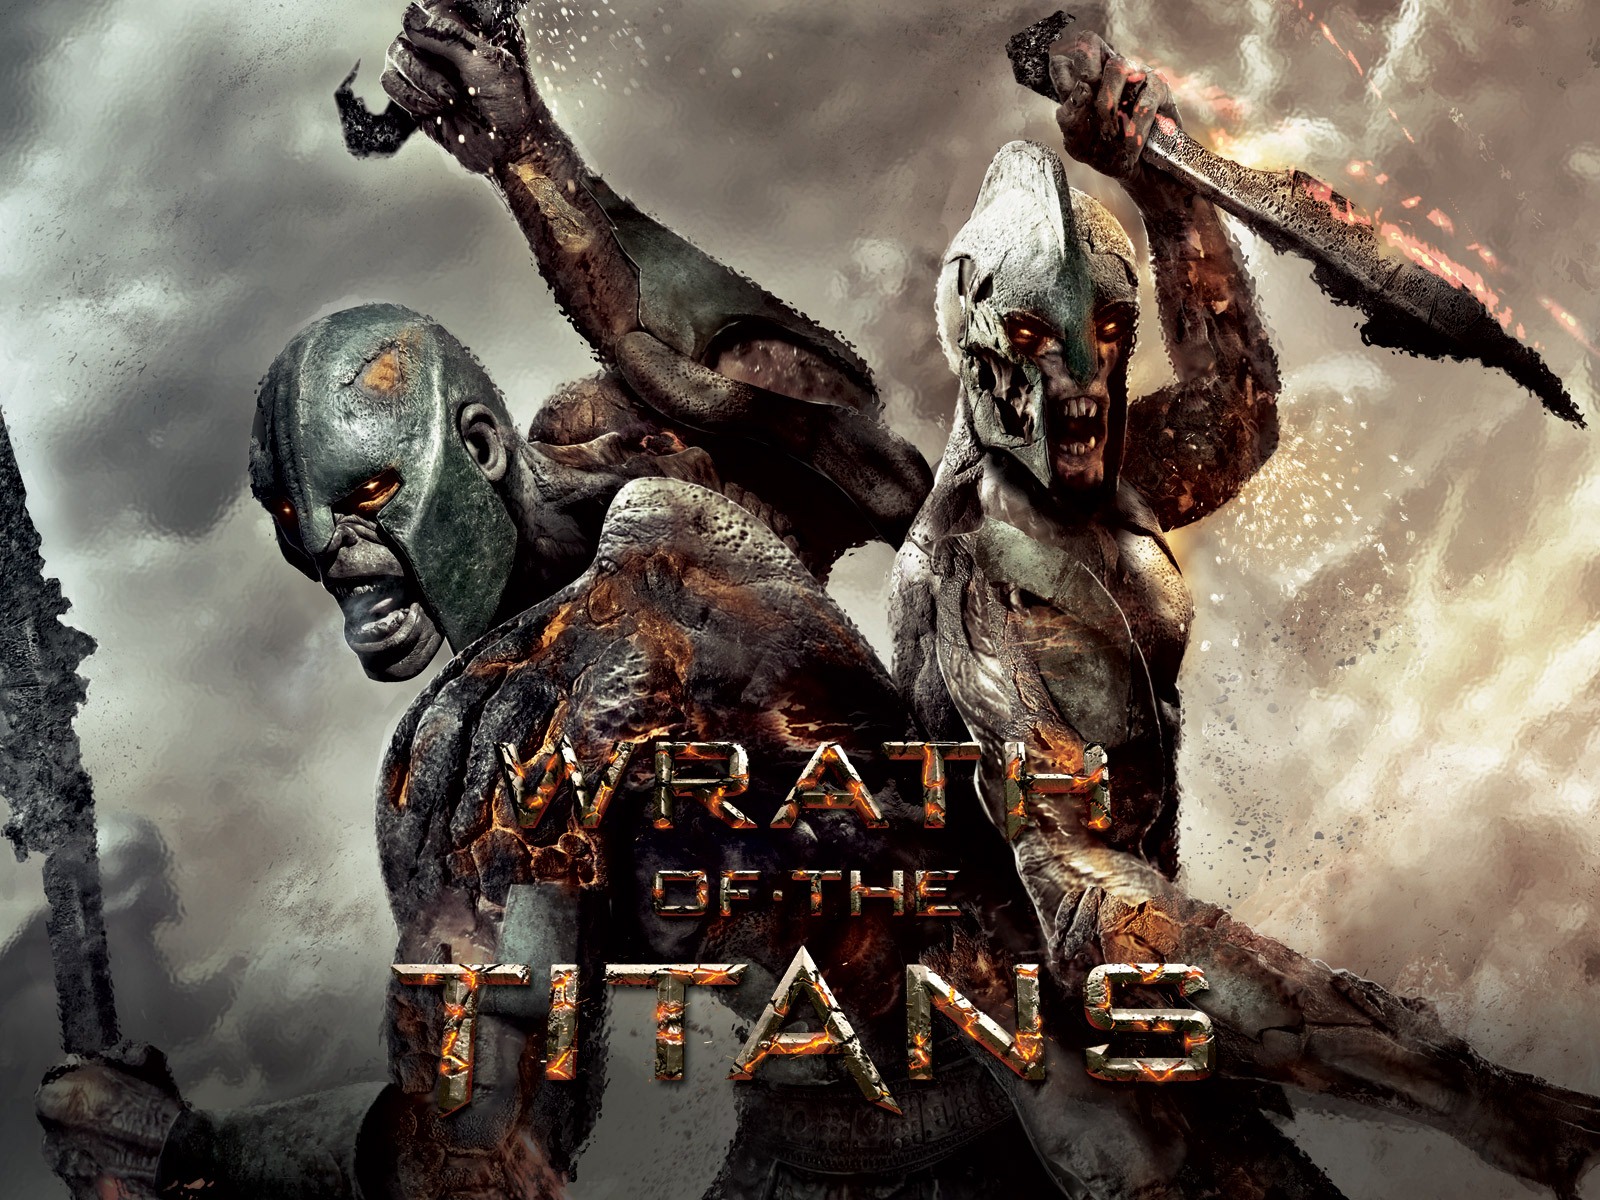 Wrath of the Titans HD wallpapers #6 - 1600x1200